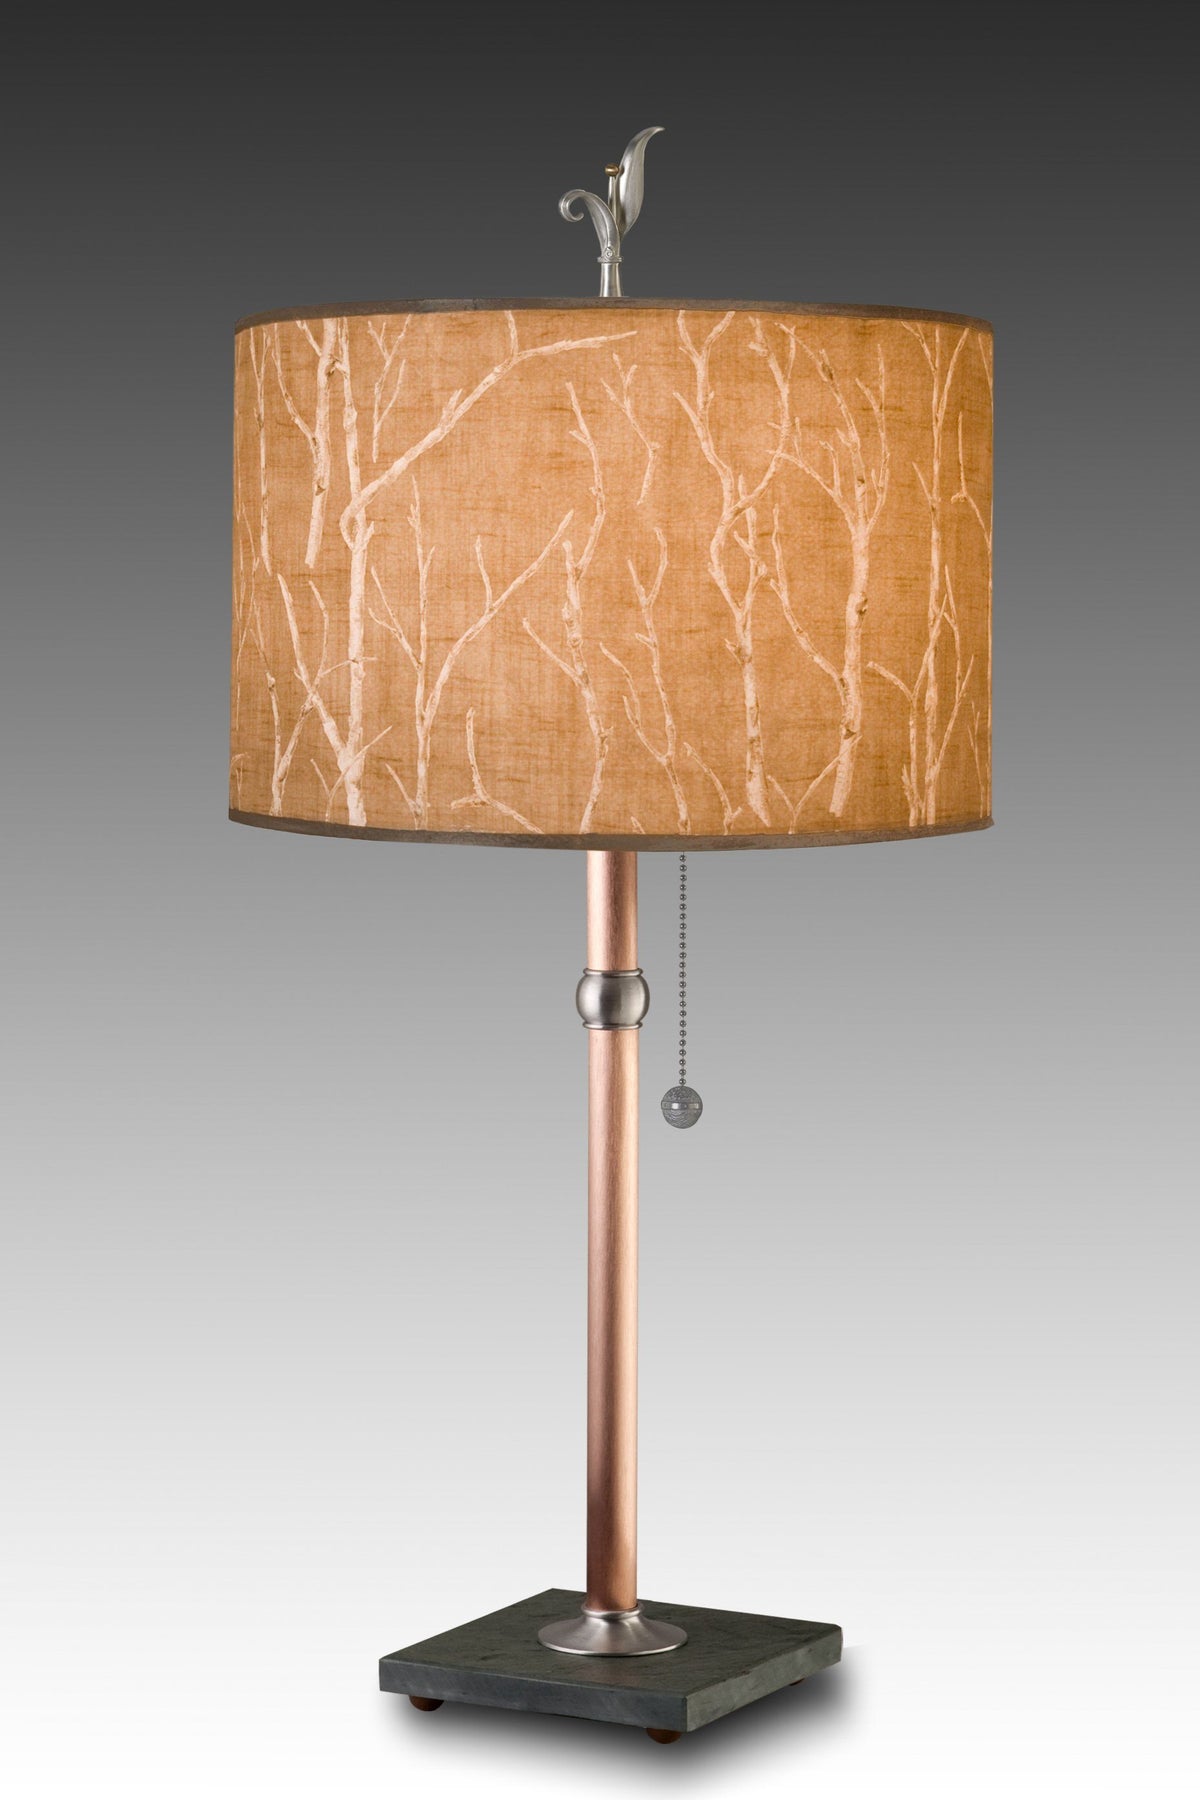 Copper Table Lamp with Large Drum Shade in Twigs